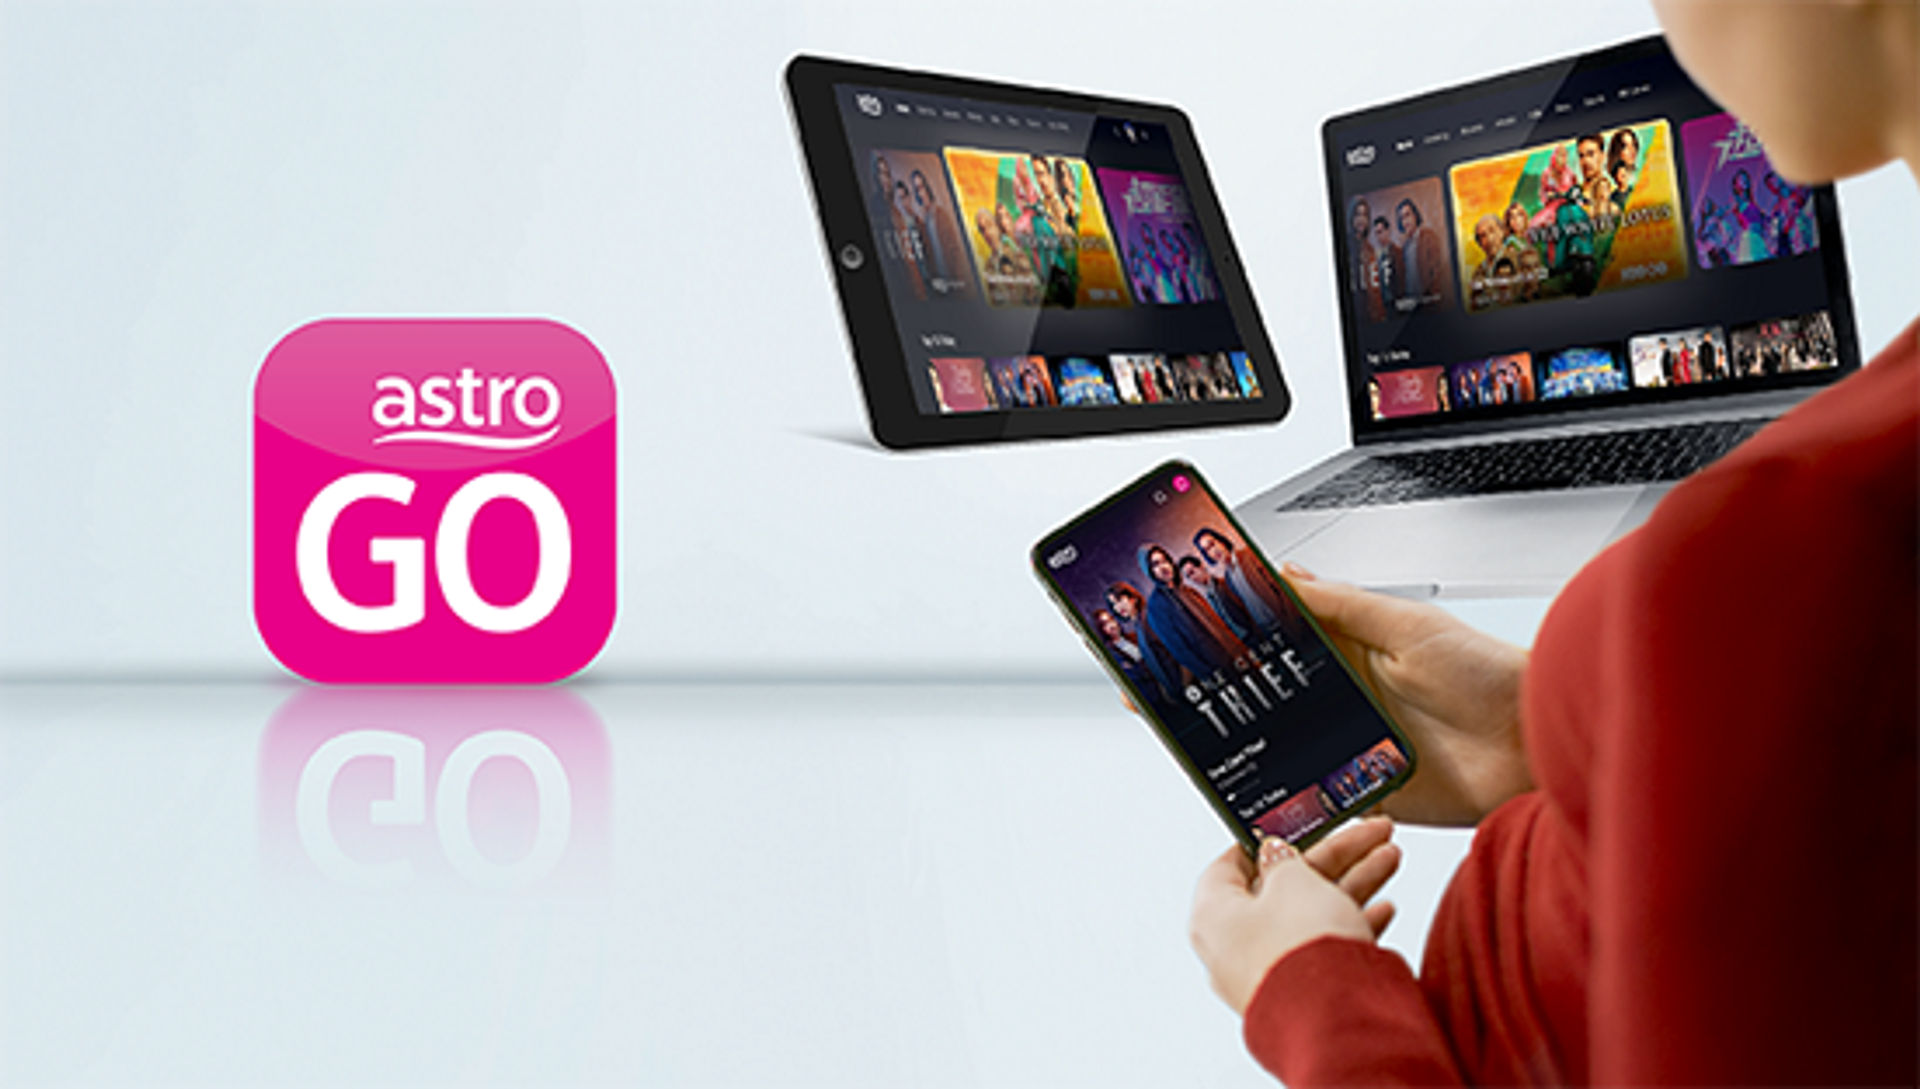 Take Astro with you wherever you go with Astro GO